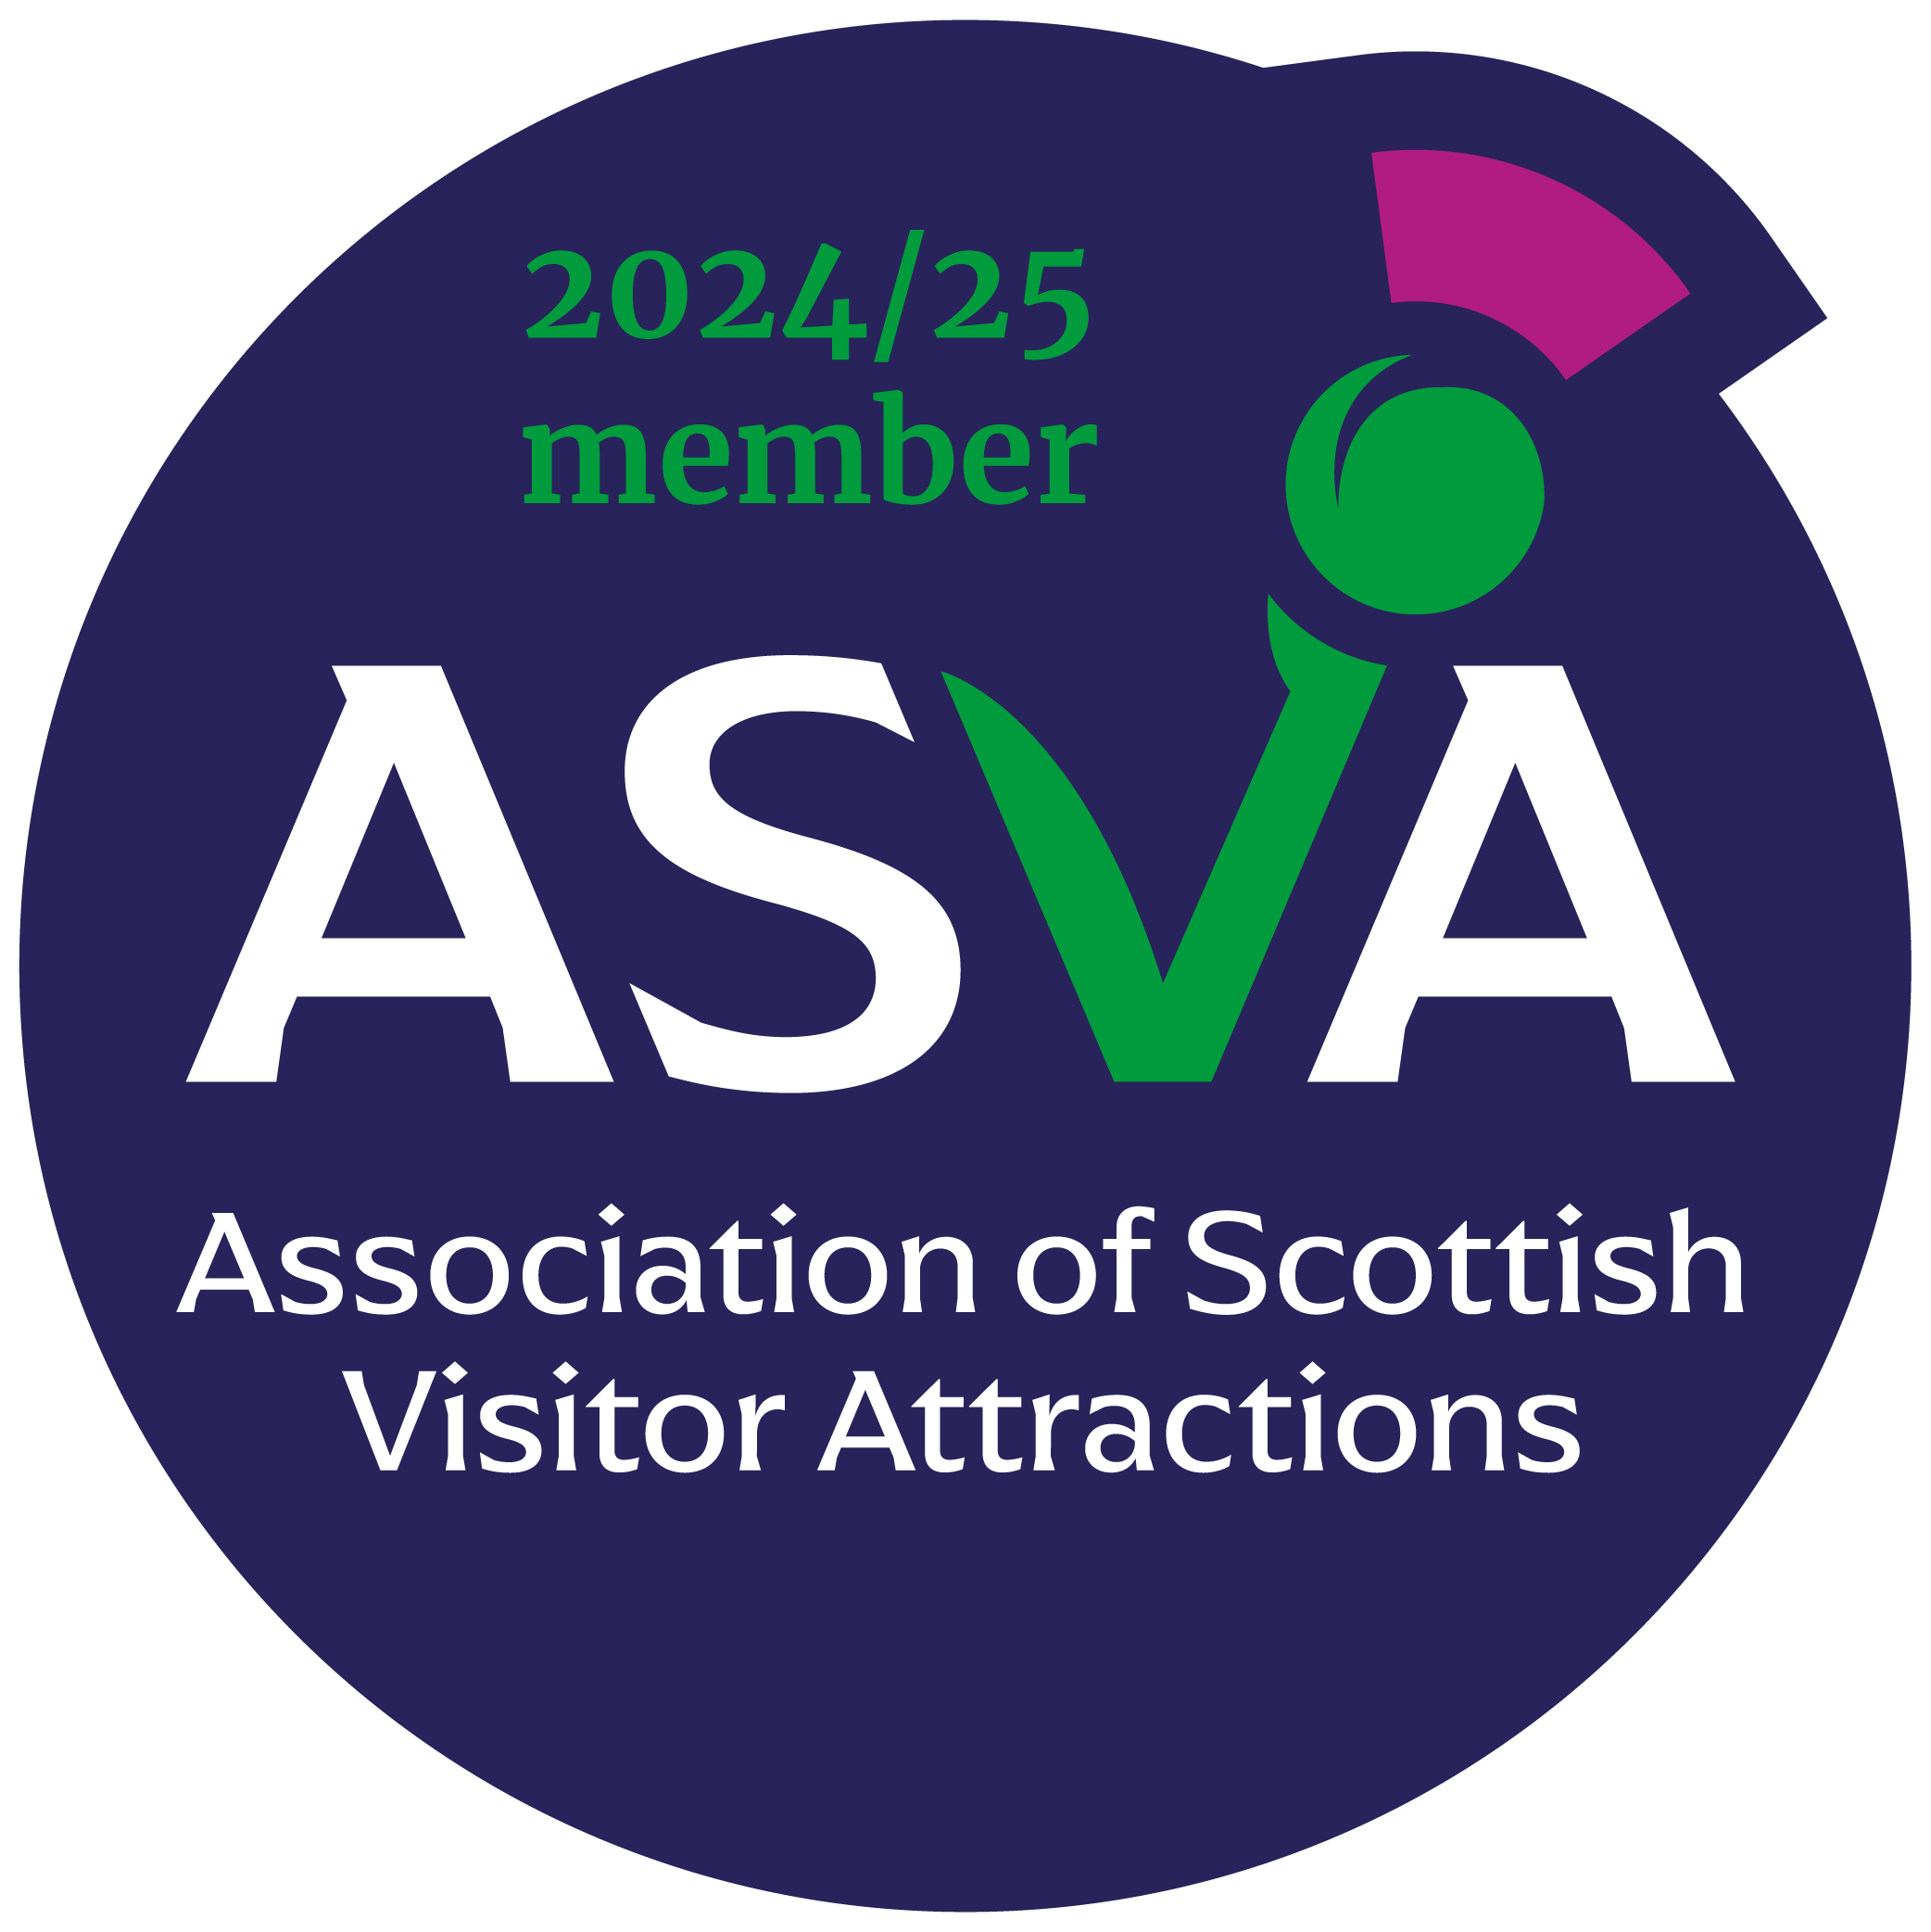 Association of Scottish Visitor Attractions